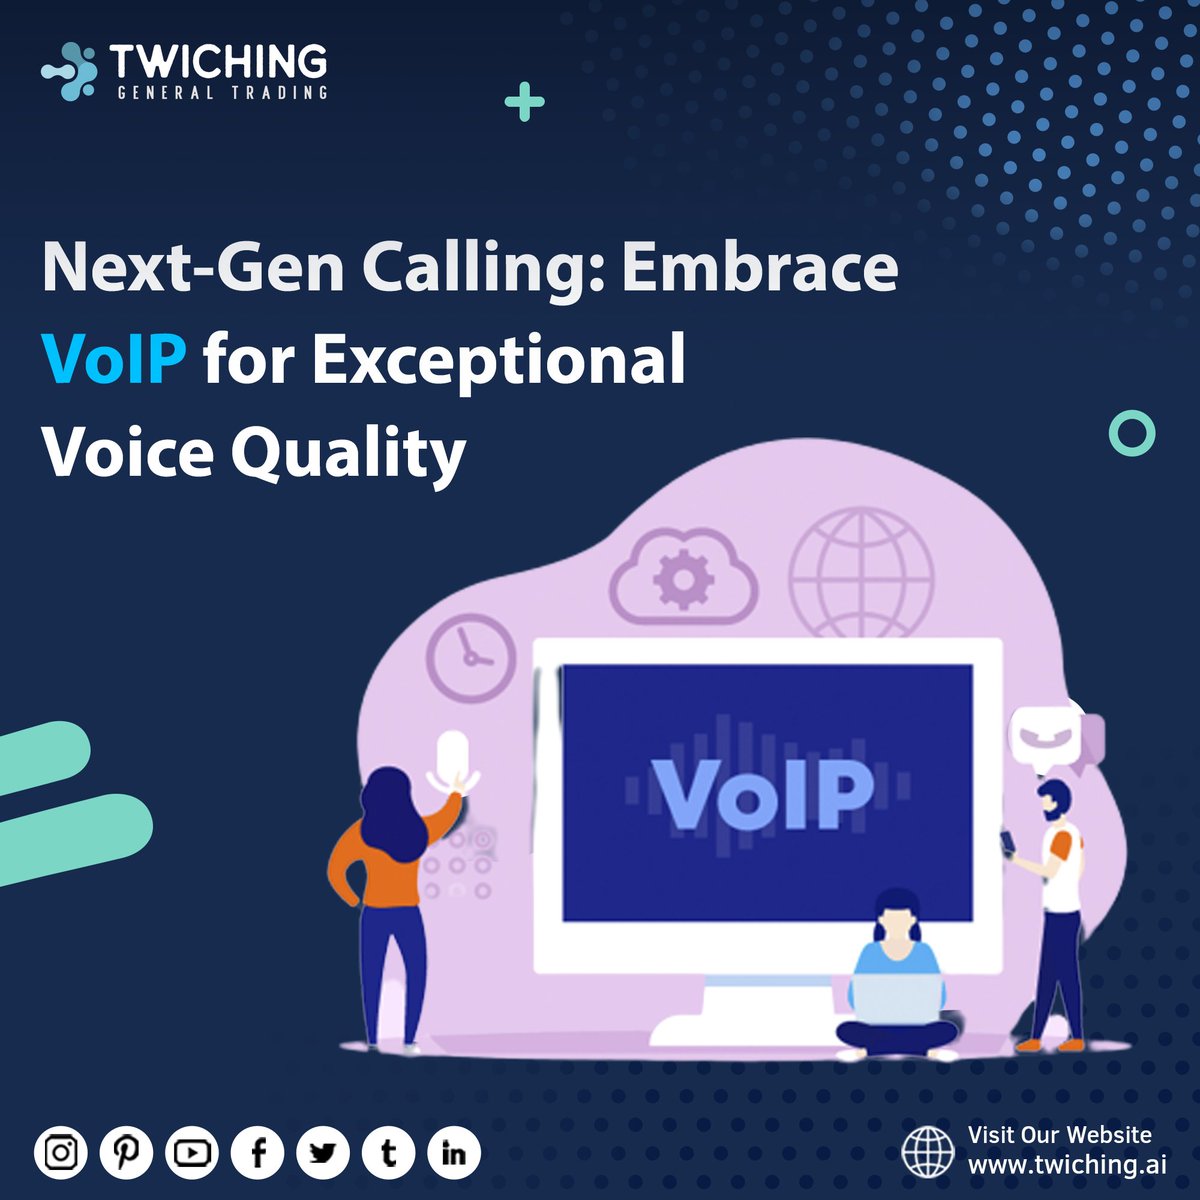 Say goodbye to call drops and static-filled conversations. Embrace the next-gen voice quality with VoIP and enjoy uninterrupted, crystal-clear calls that leave a lasting impression.

For more information : twiching.ai/voip/

#NextGenCalling #CrystalClearCalls #GlobalReach